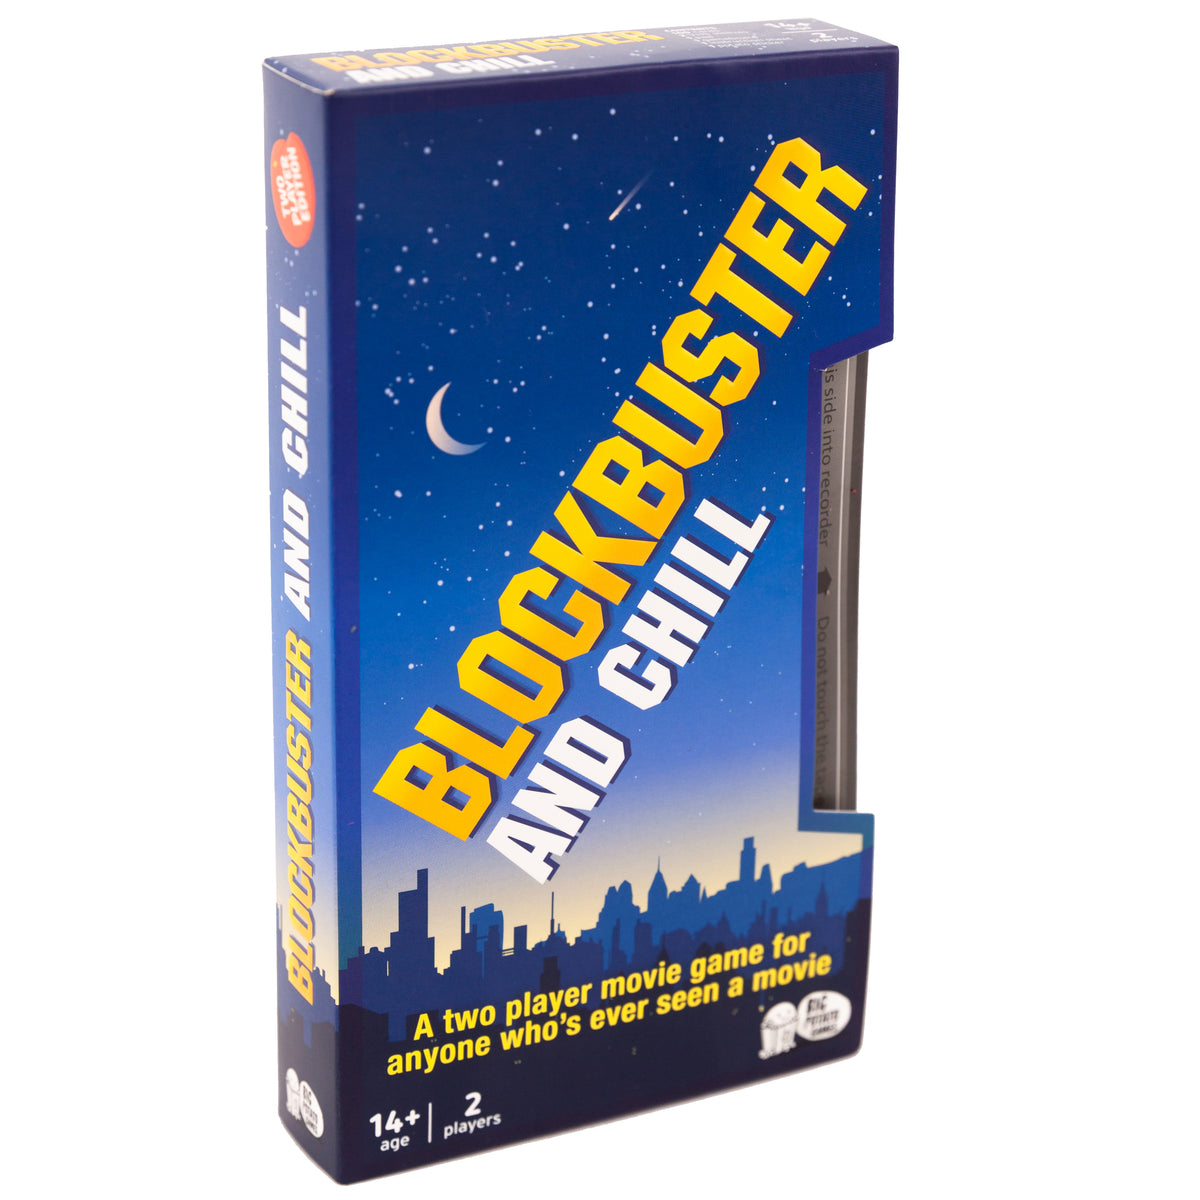 A board game packaged in a VHS tape sleeve. The sleeve shows a nighttime city skyline and big yellow block capitals saying &#39;BLOCKBUSTER AND CHILL&#39;. Below this is smaller writing stating &#39;a two player movie game for anyone who&#39;s ever seen a movie&#39;.